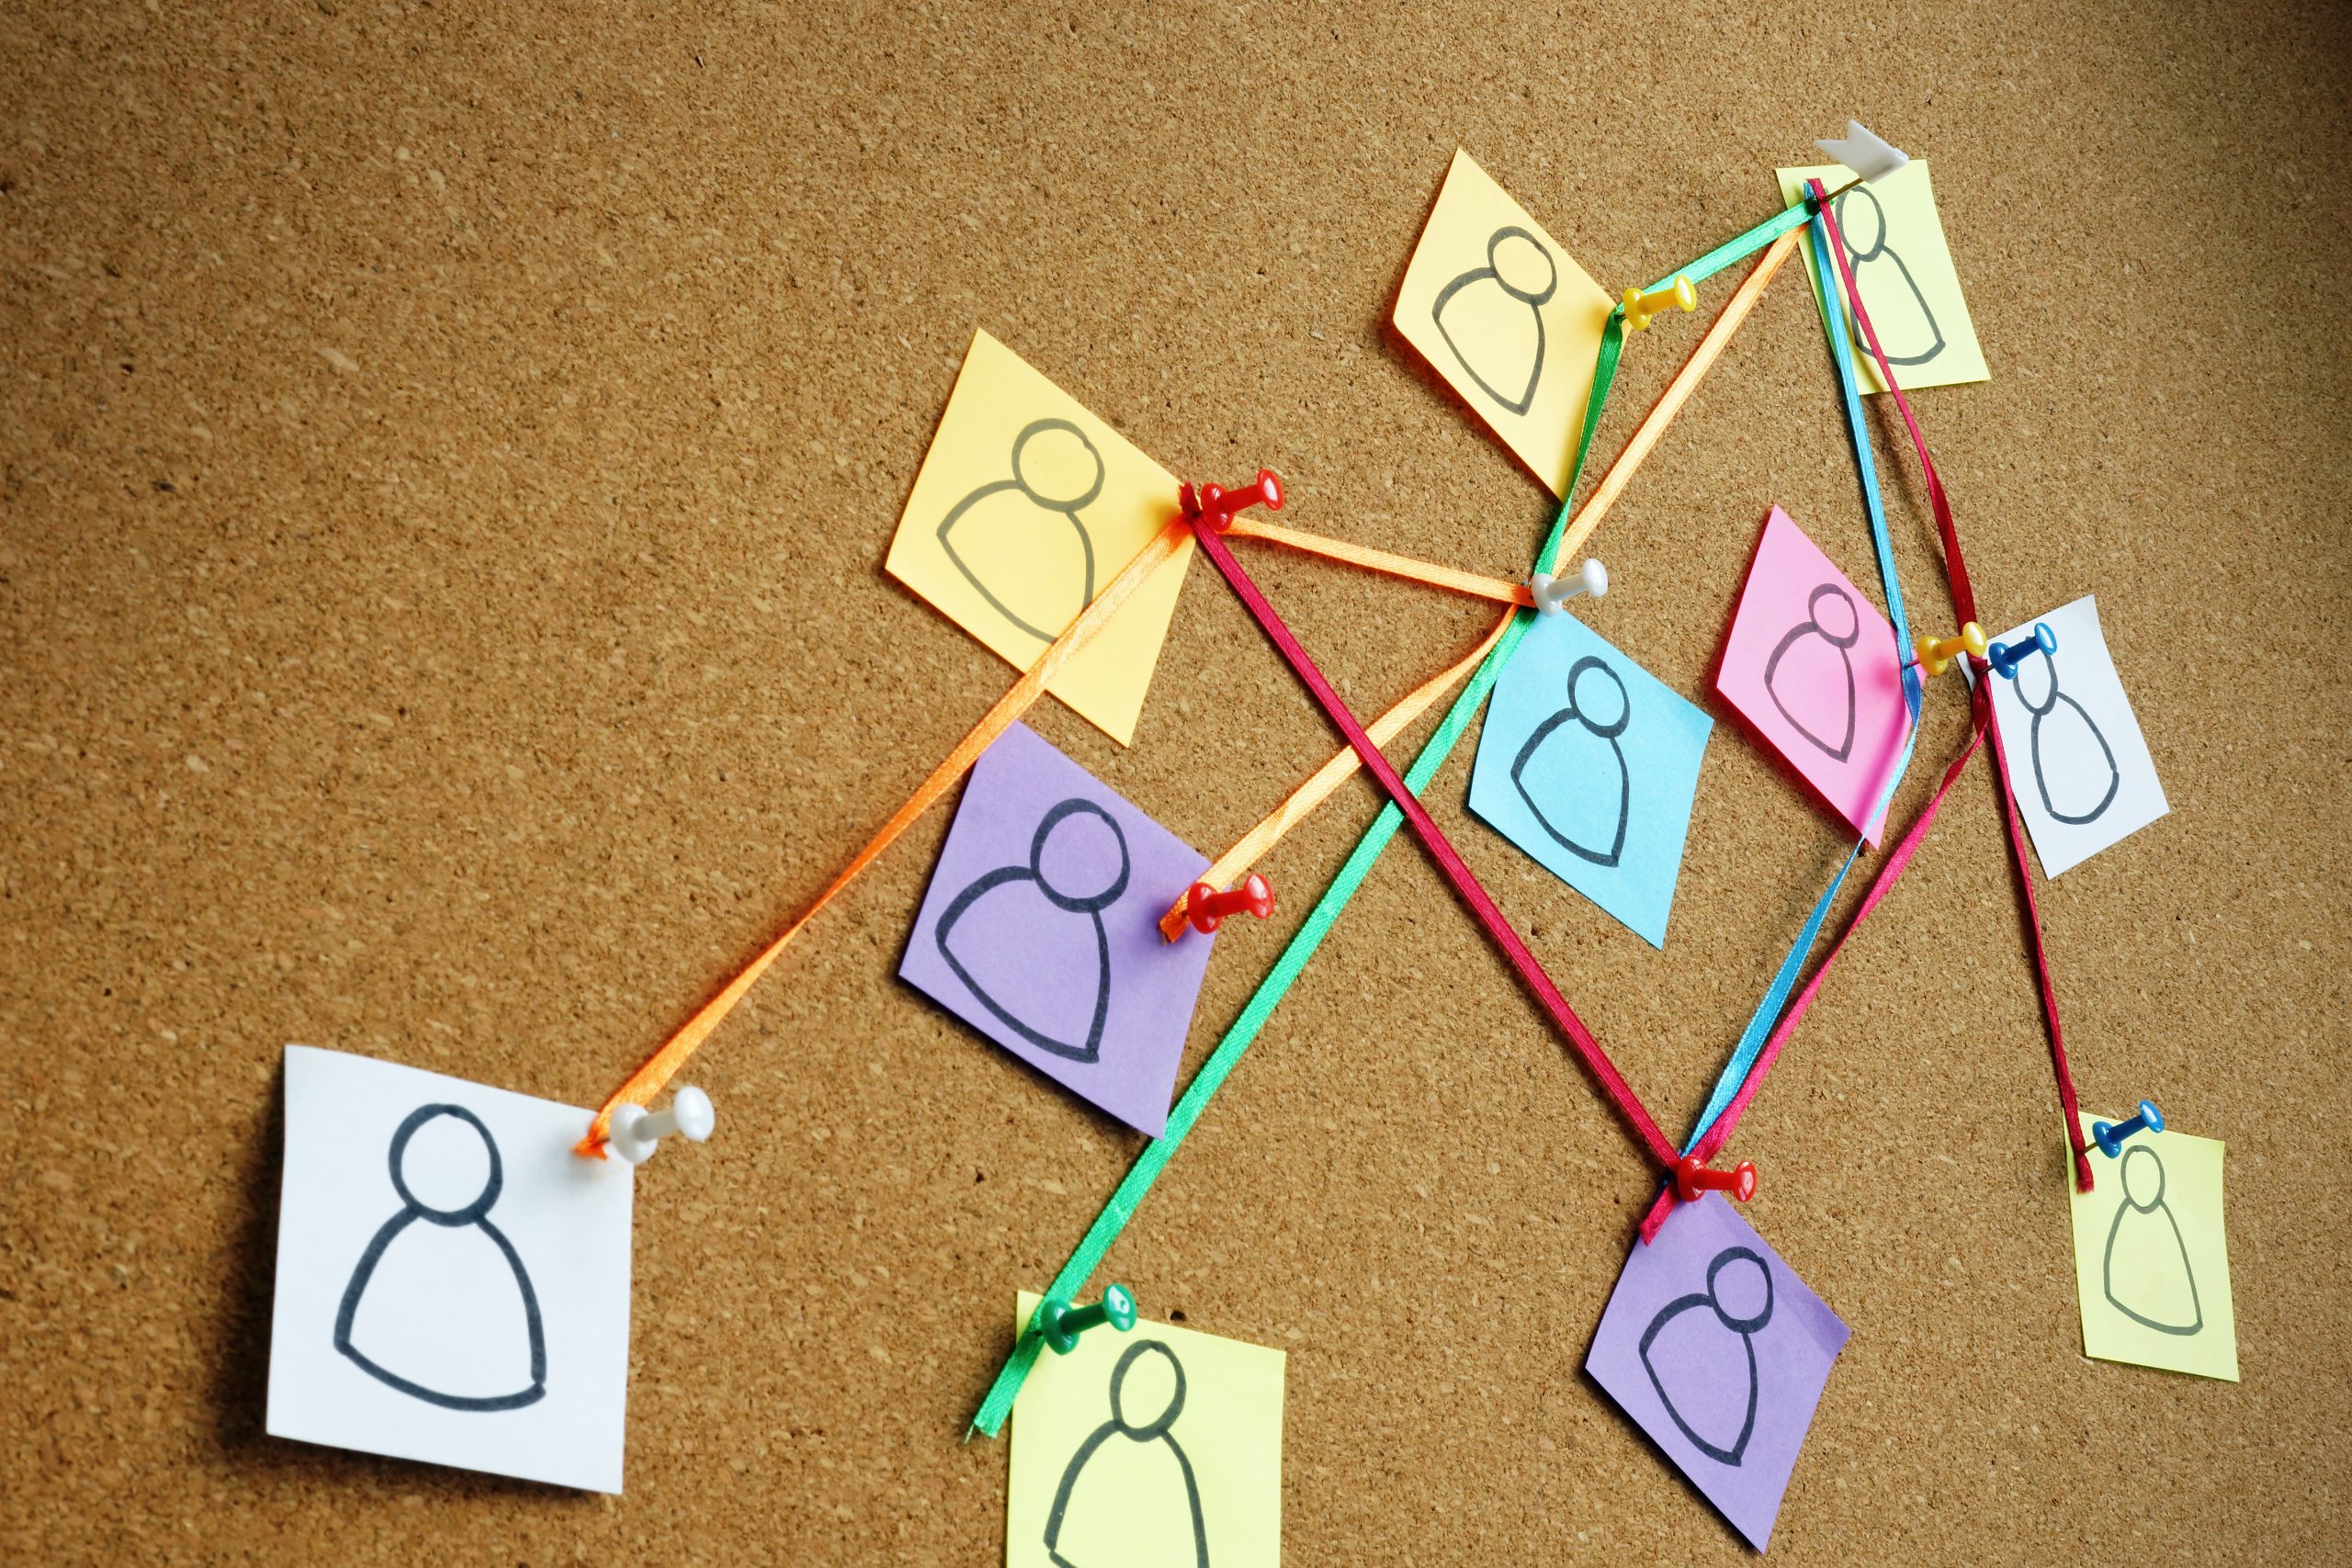 Lines connecting sticky notes represent a non-profit's organizational structure.